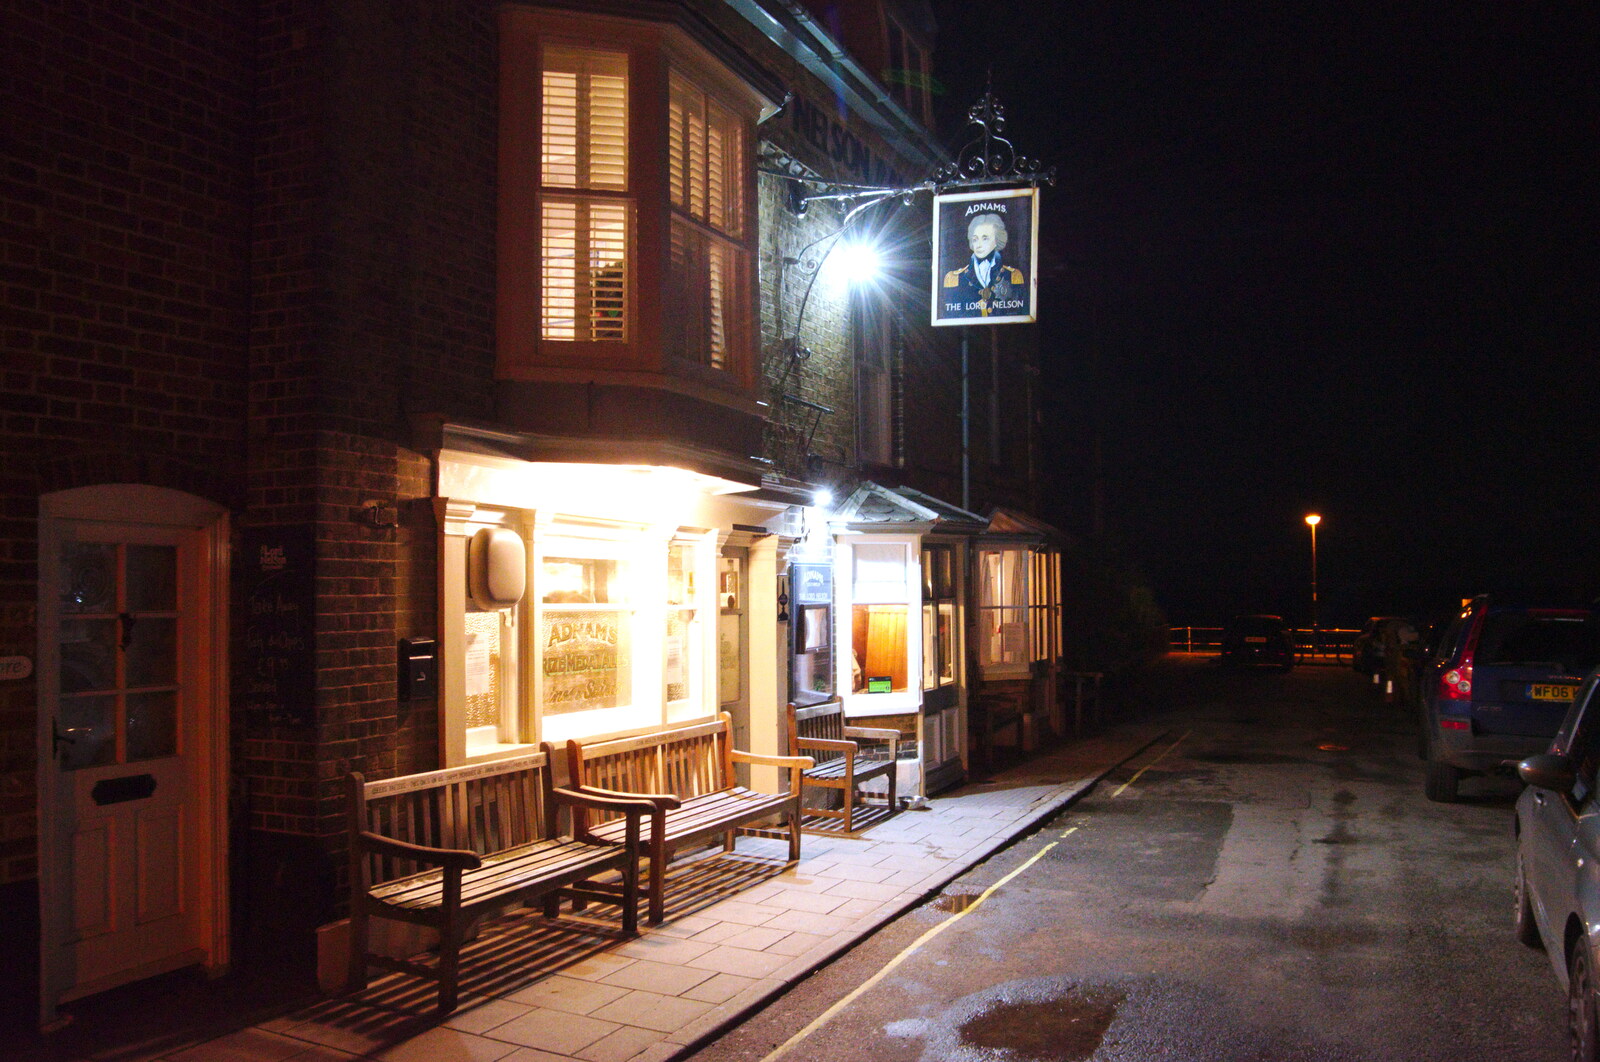 The Lord Nelson pub in Southwold. Oh yes. from A Night at the Crown Hotel, Southwold, Suffolk - 8th November 2019